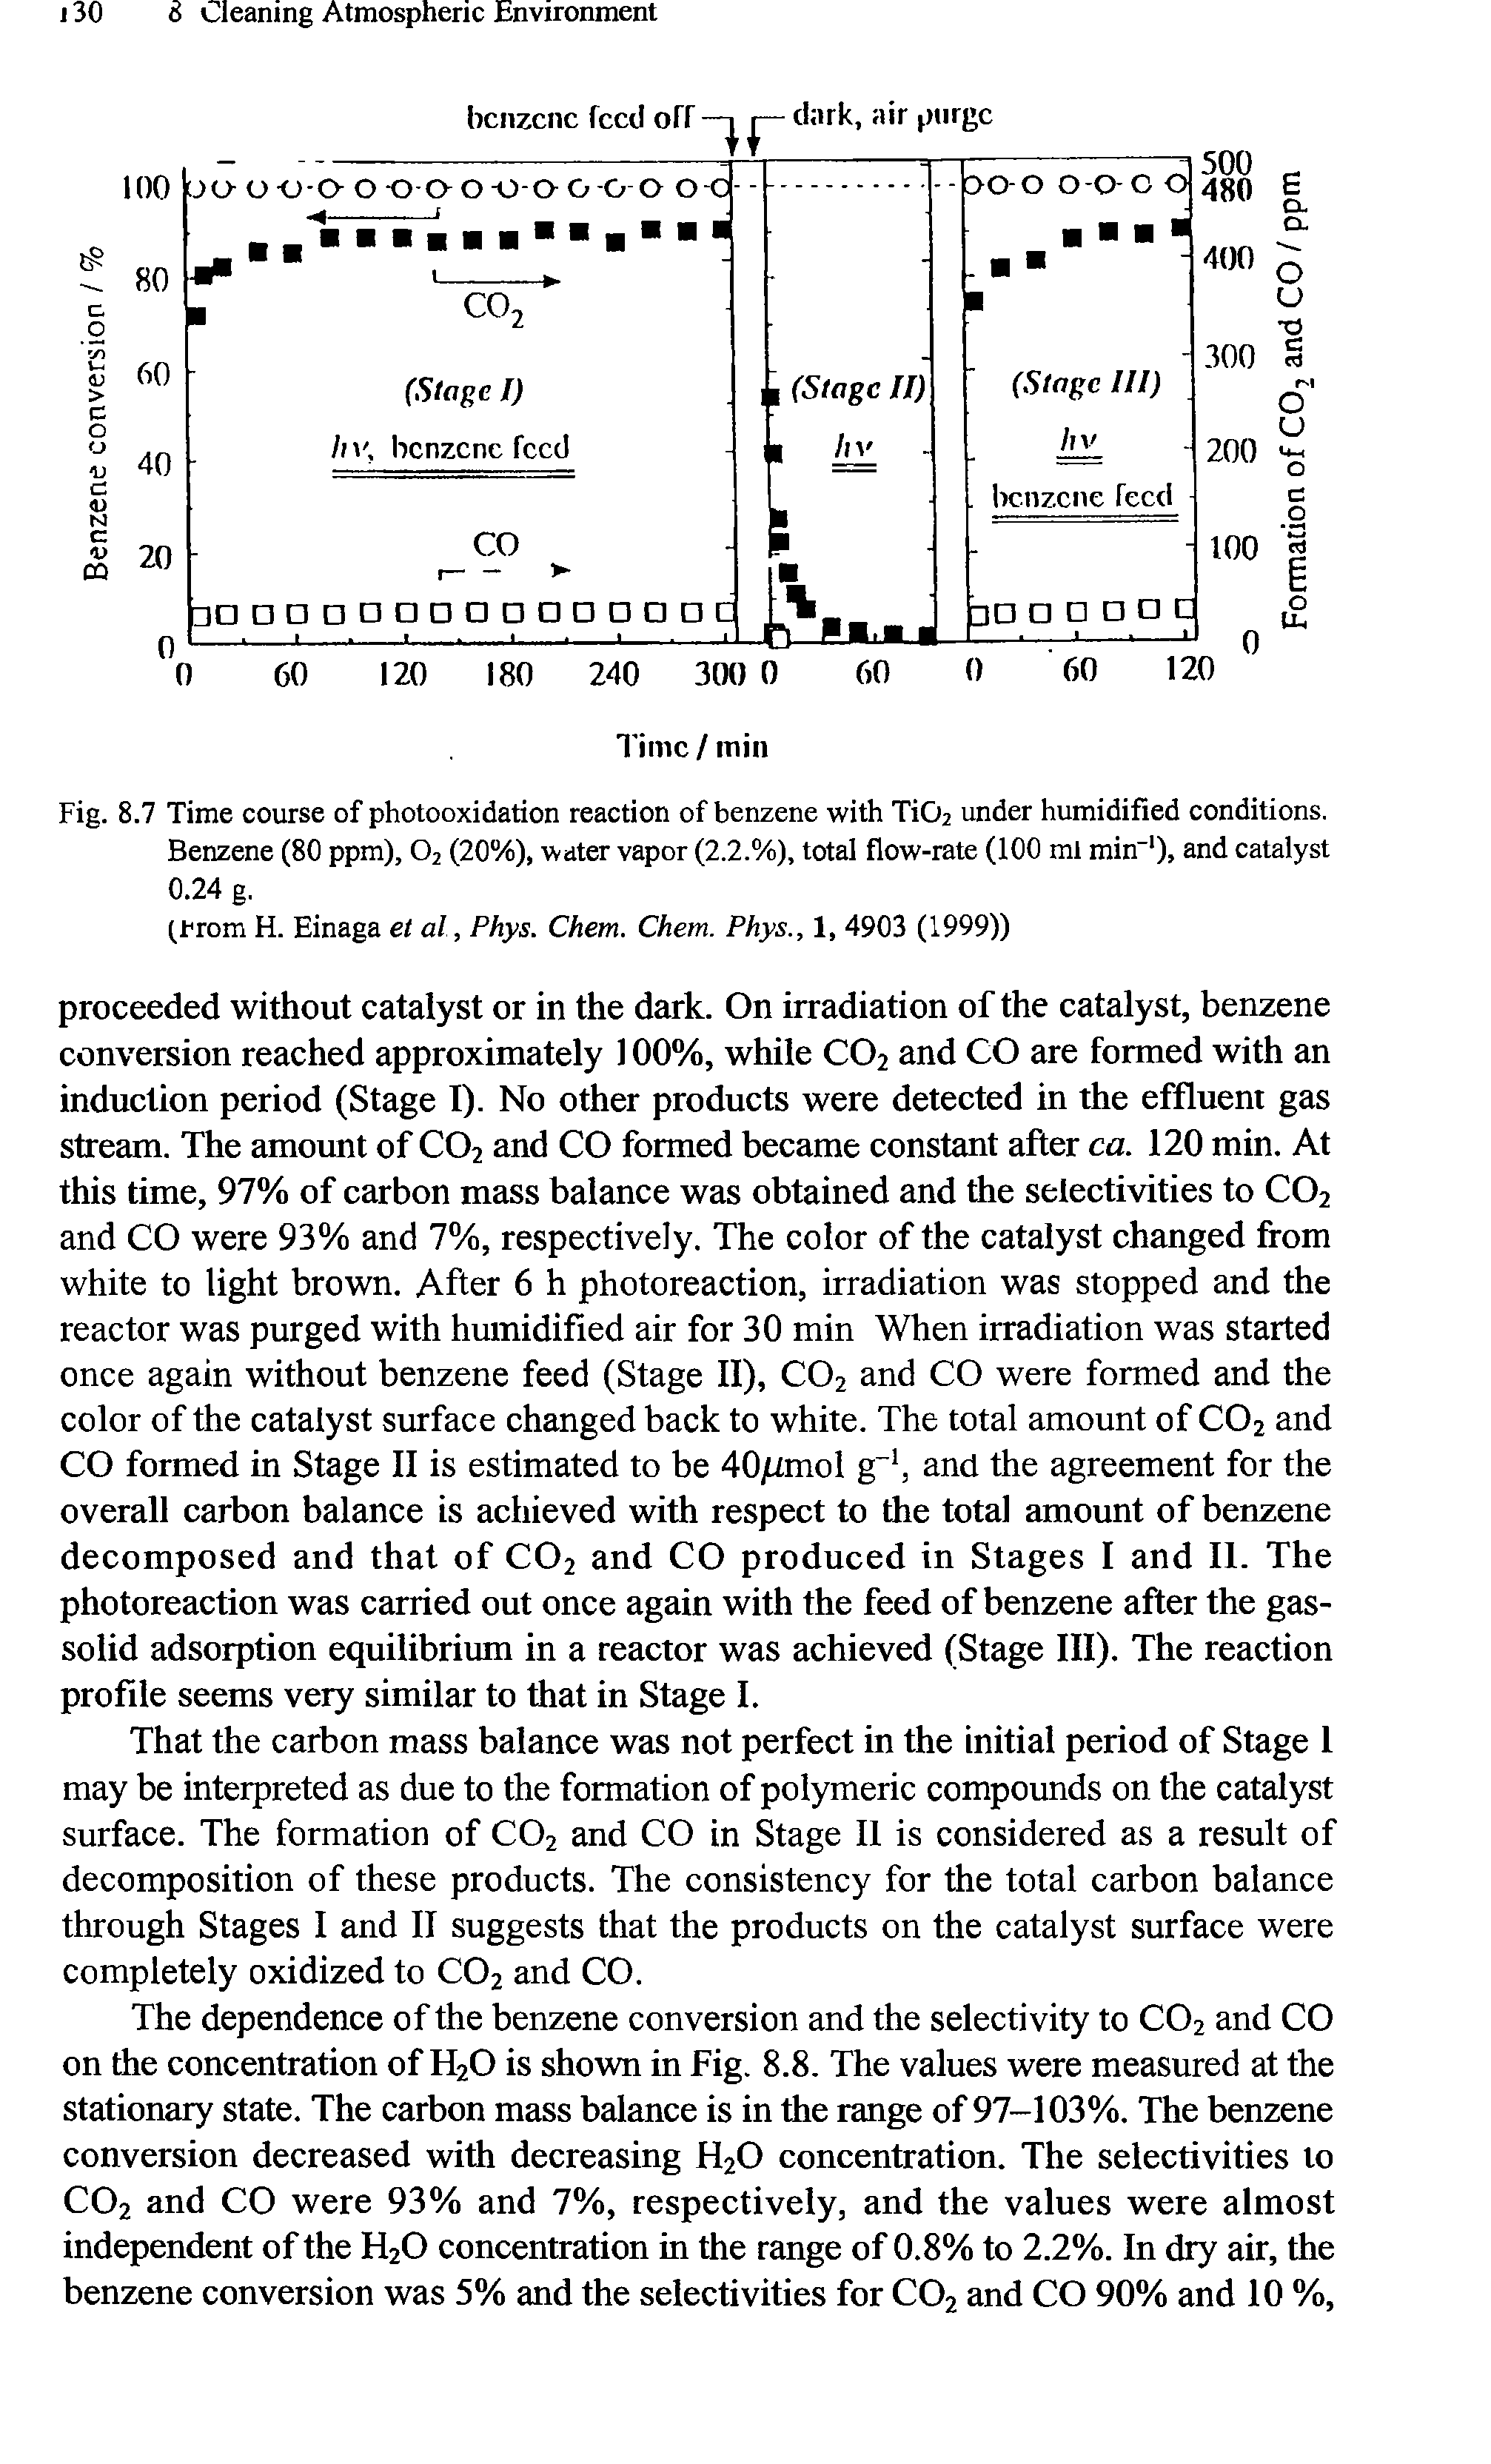 Fig. 8.7 Time course of photooxidation reaction of benzene with TiG2 under humidified conditions. Benzene (80 ppm), 02 (20%), water vapor (2.2.%), total flow-rate (100 ml miir )> and catalyst 0.24 g.